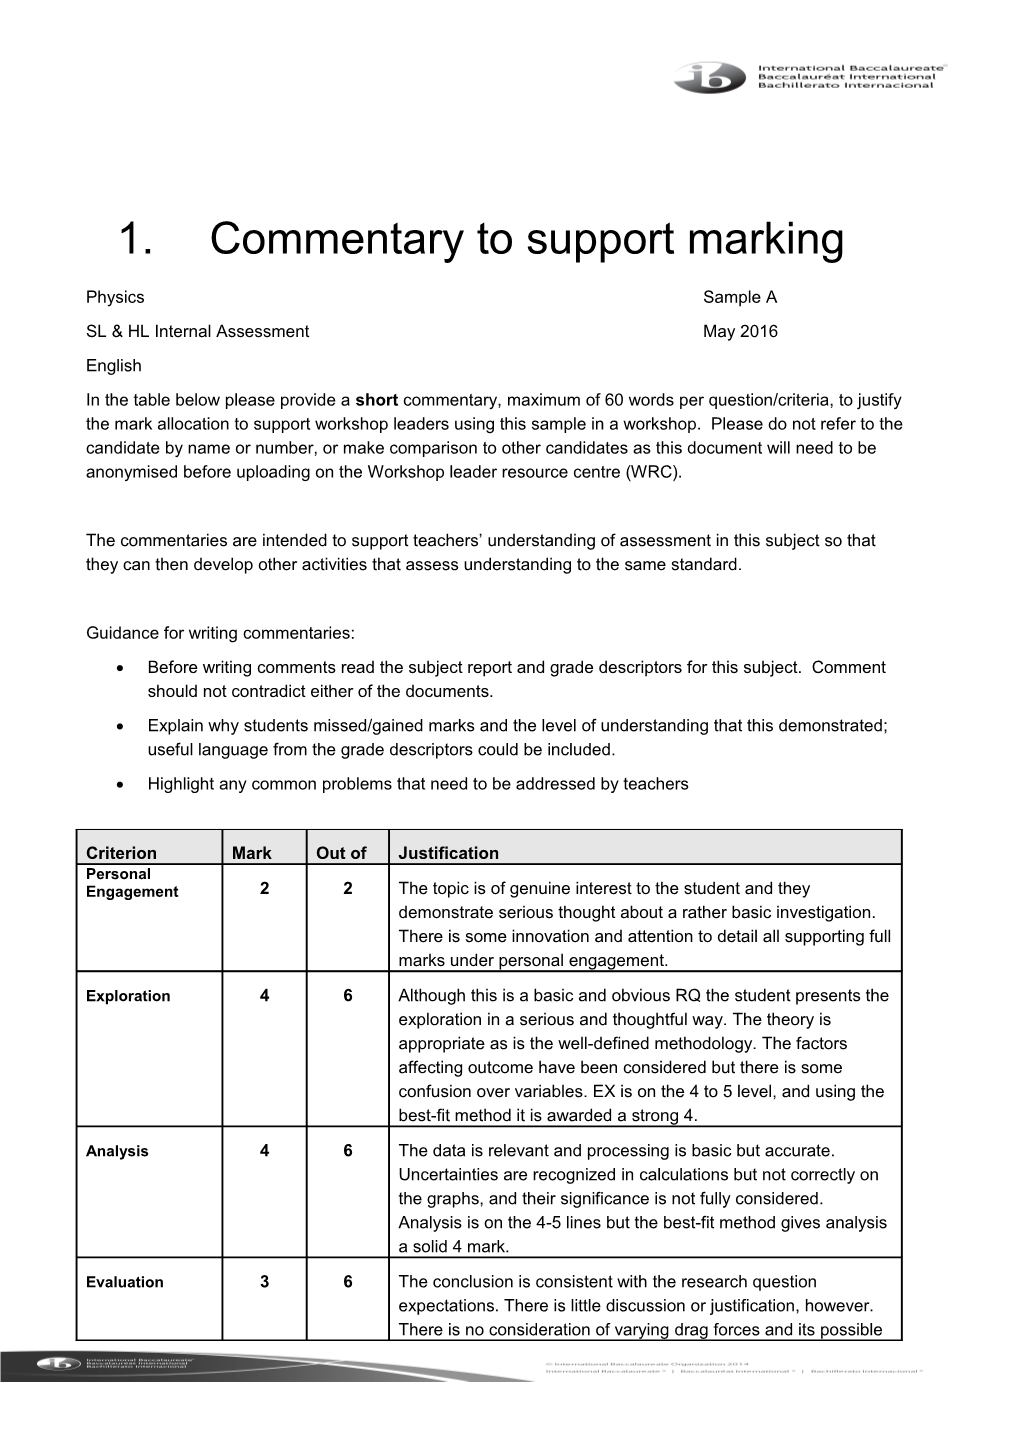 Commentary to Support Marking